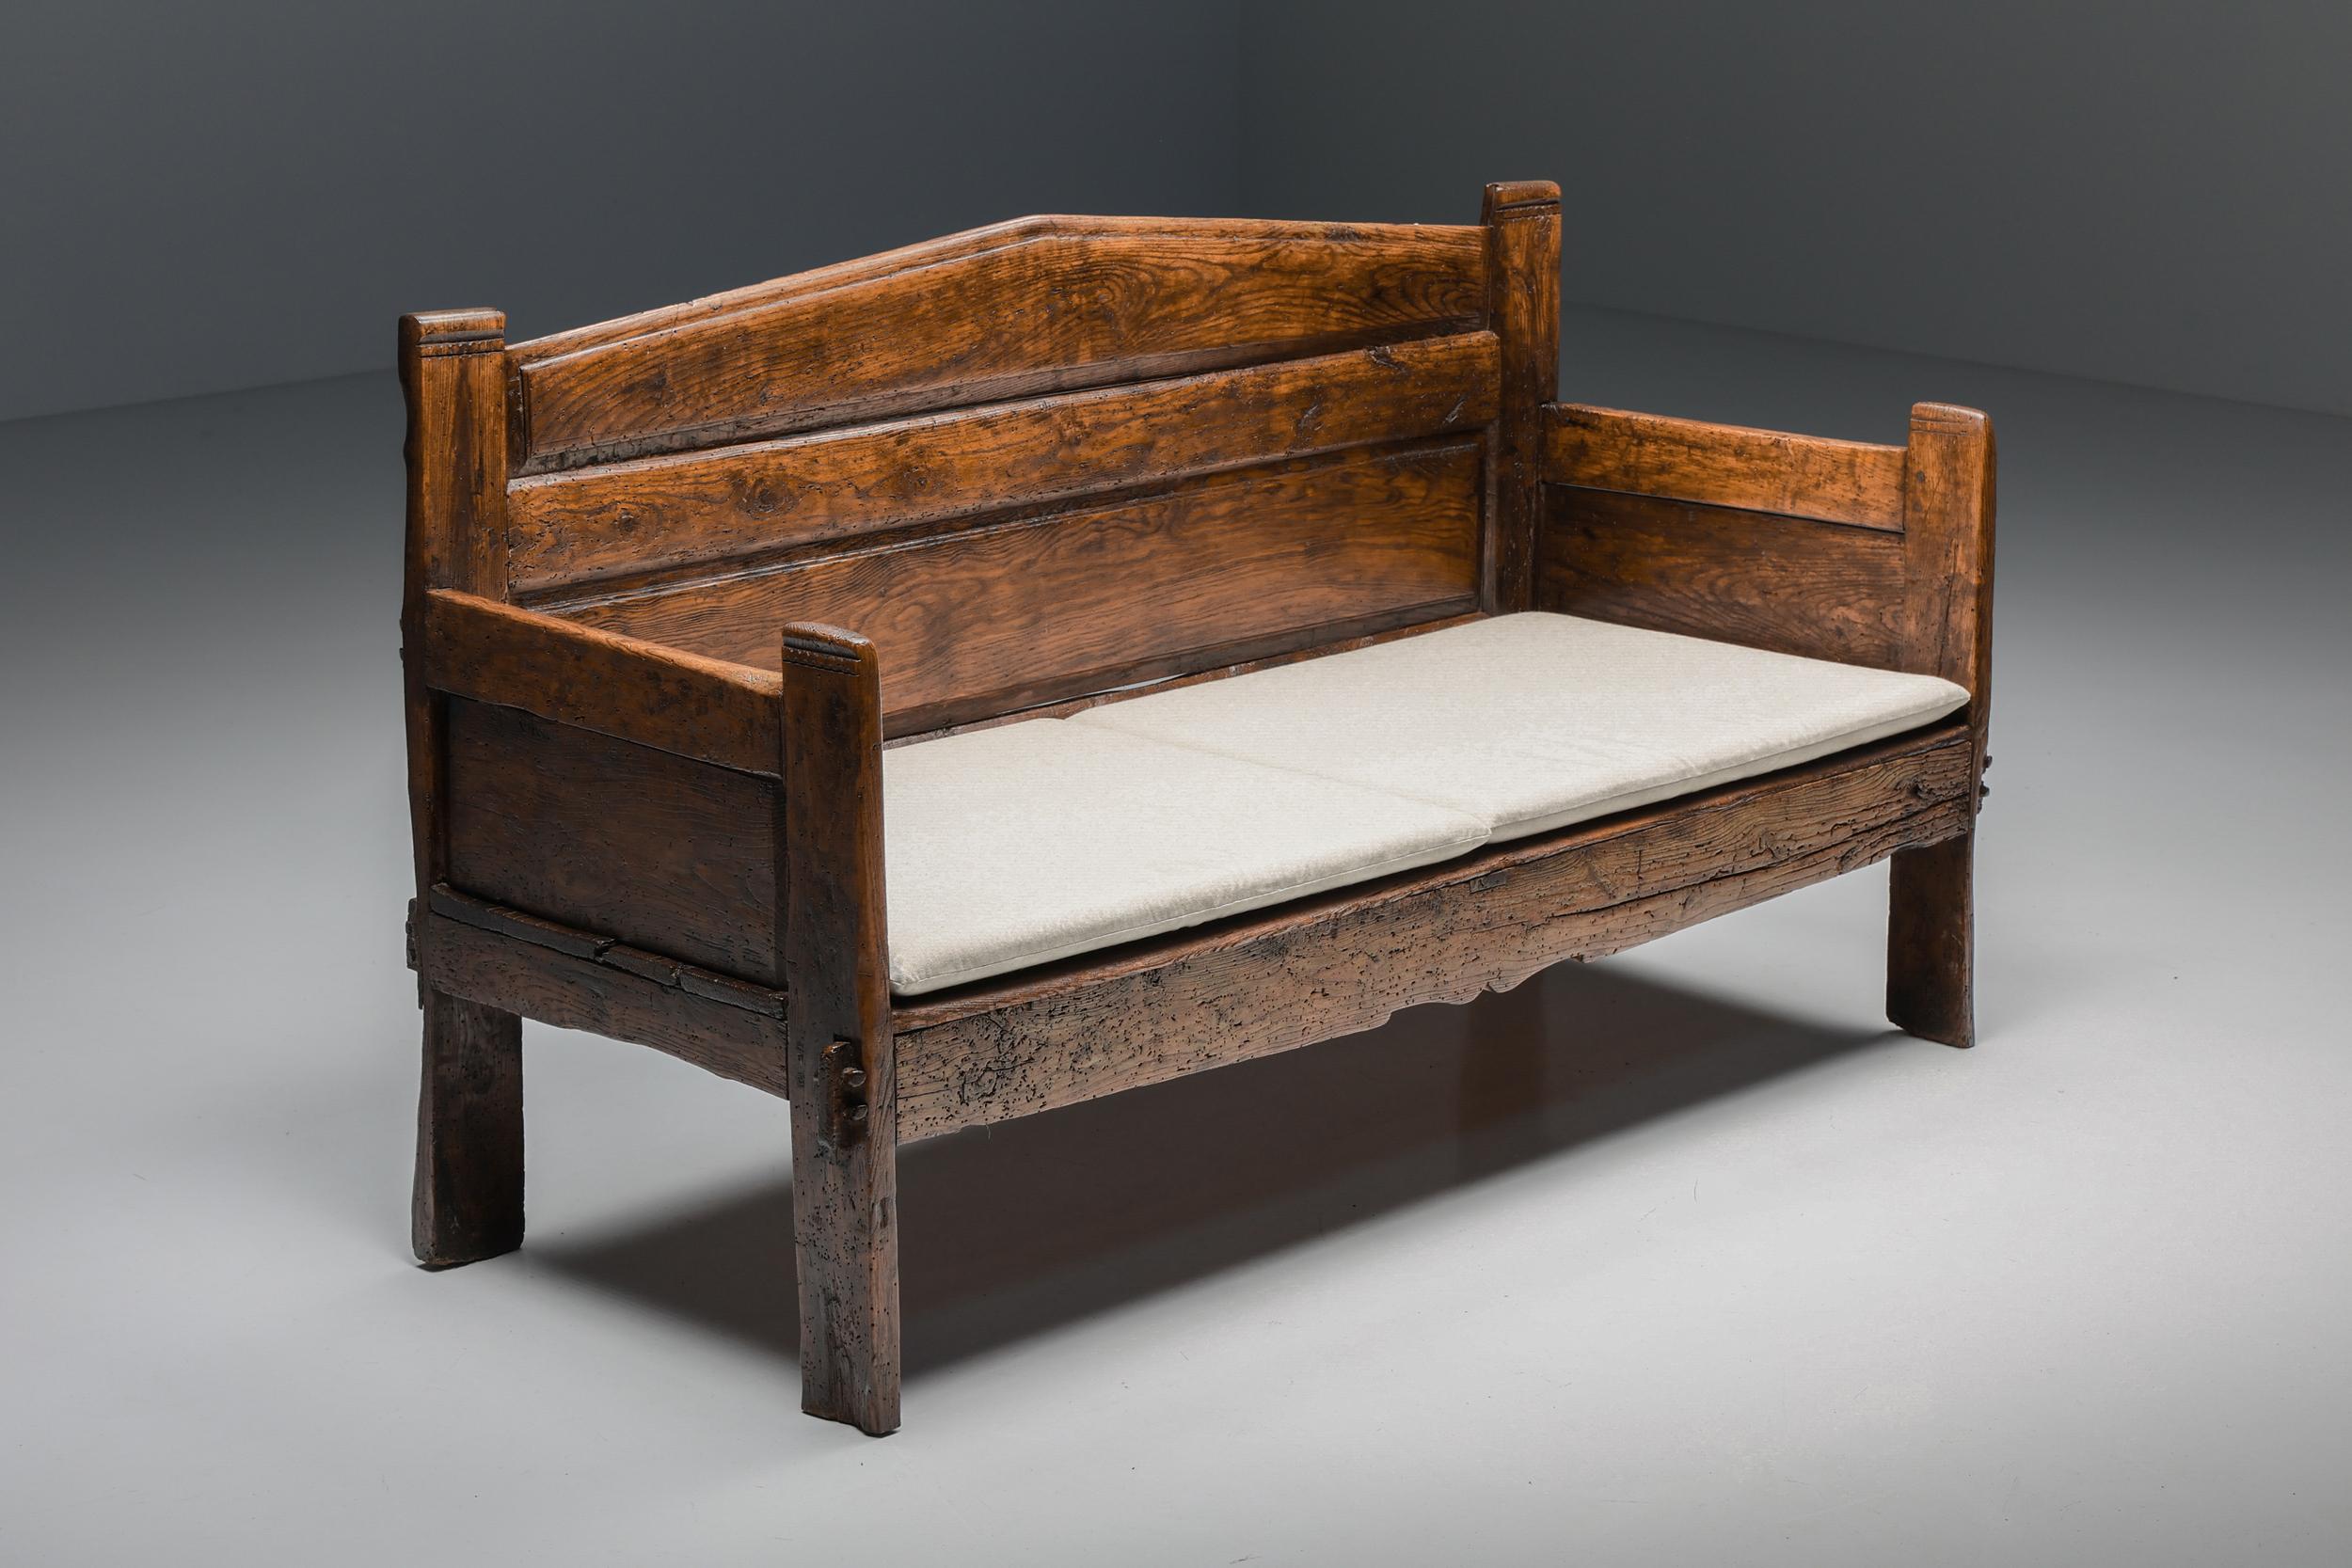 Wabi-Sabi three seater bench, Monoxylite, Haut Savoie, Breton, 19th century

This rustic bench seats three people comfortably. The patina on the monoxylite wood speaks to the great history of this 19th-century piece. This piece includes two